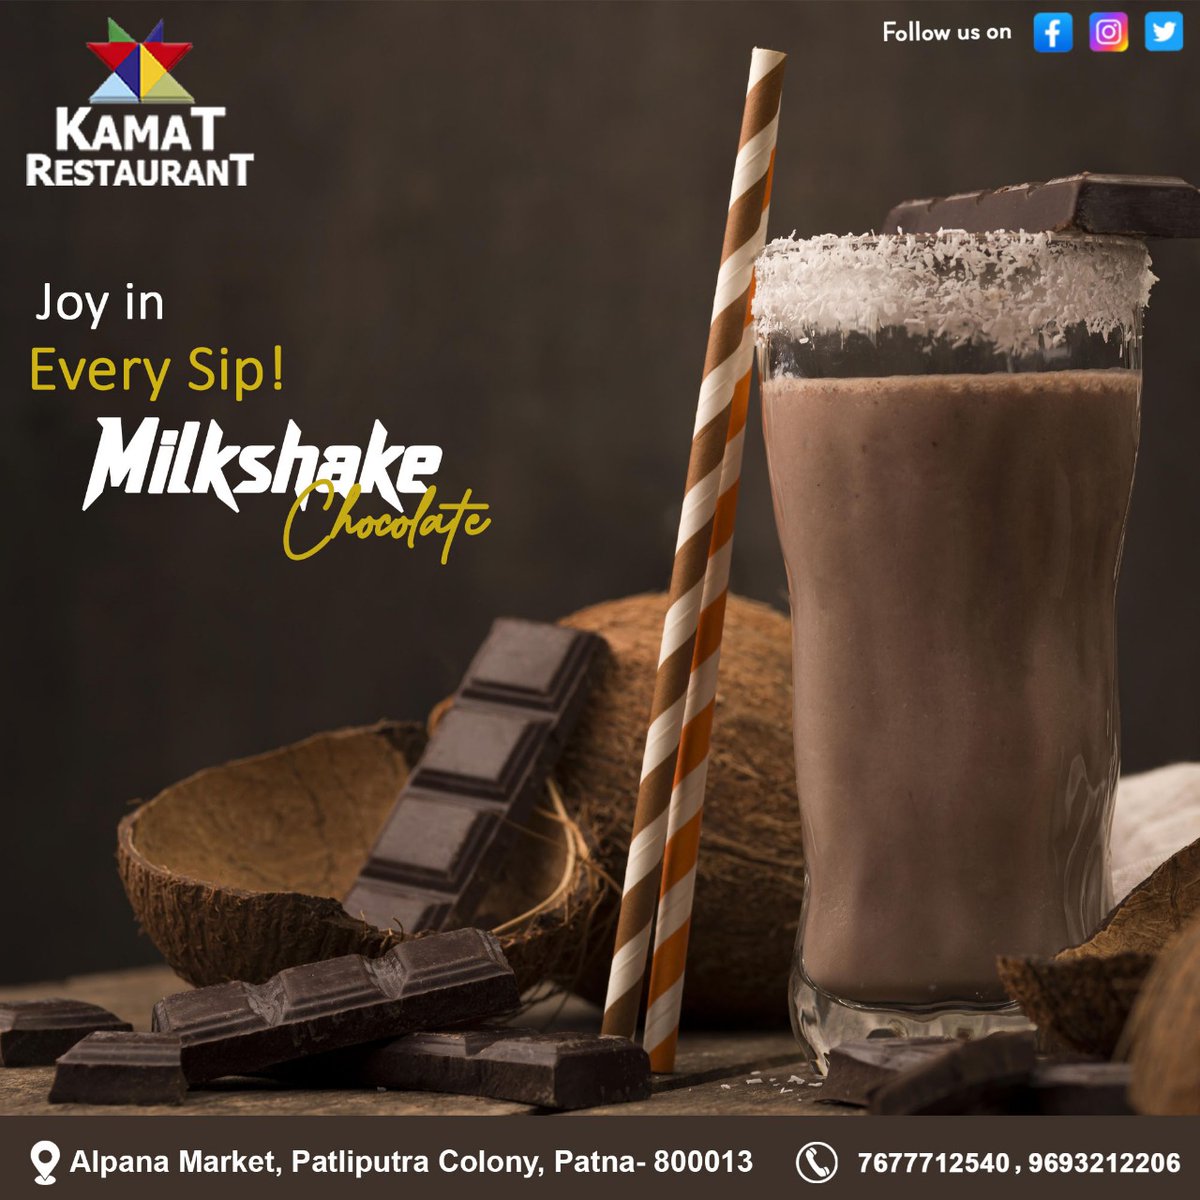 Joy in Every Sip !!
MILKSHAKE CHOCOLATE...
Please call on :- 𝟎𝟔𝟏𝟐 - 𝟐𝟐𝟔𝟔𝟐𝟎𝟕 +𝟗𝟏 𝟕𝟔𝟕𝟕𝟕𝟏𝟐𝟓𝟒𝟎, +𝟗𝟏 𝟗𝟔𝟗𝟑𝟐𝟏𝟐𝟐𝟎𝟔
#milkshake #chocolate #trynow #homedelivery #kamatrestaurant #deliciousrecipes #yummy #Foodie #FoodInTheAir #Delish #CleanEatin